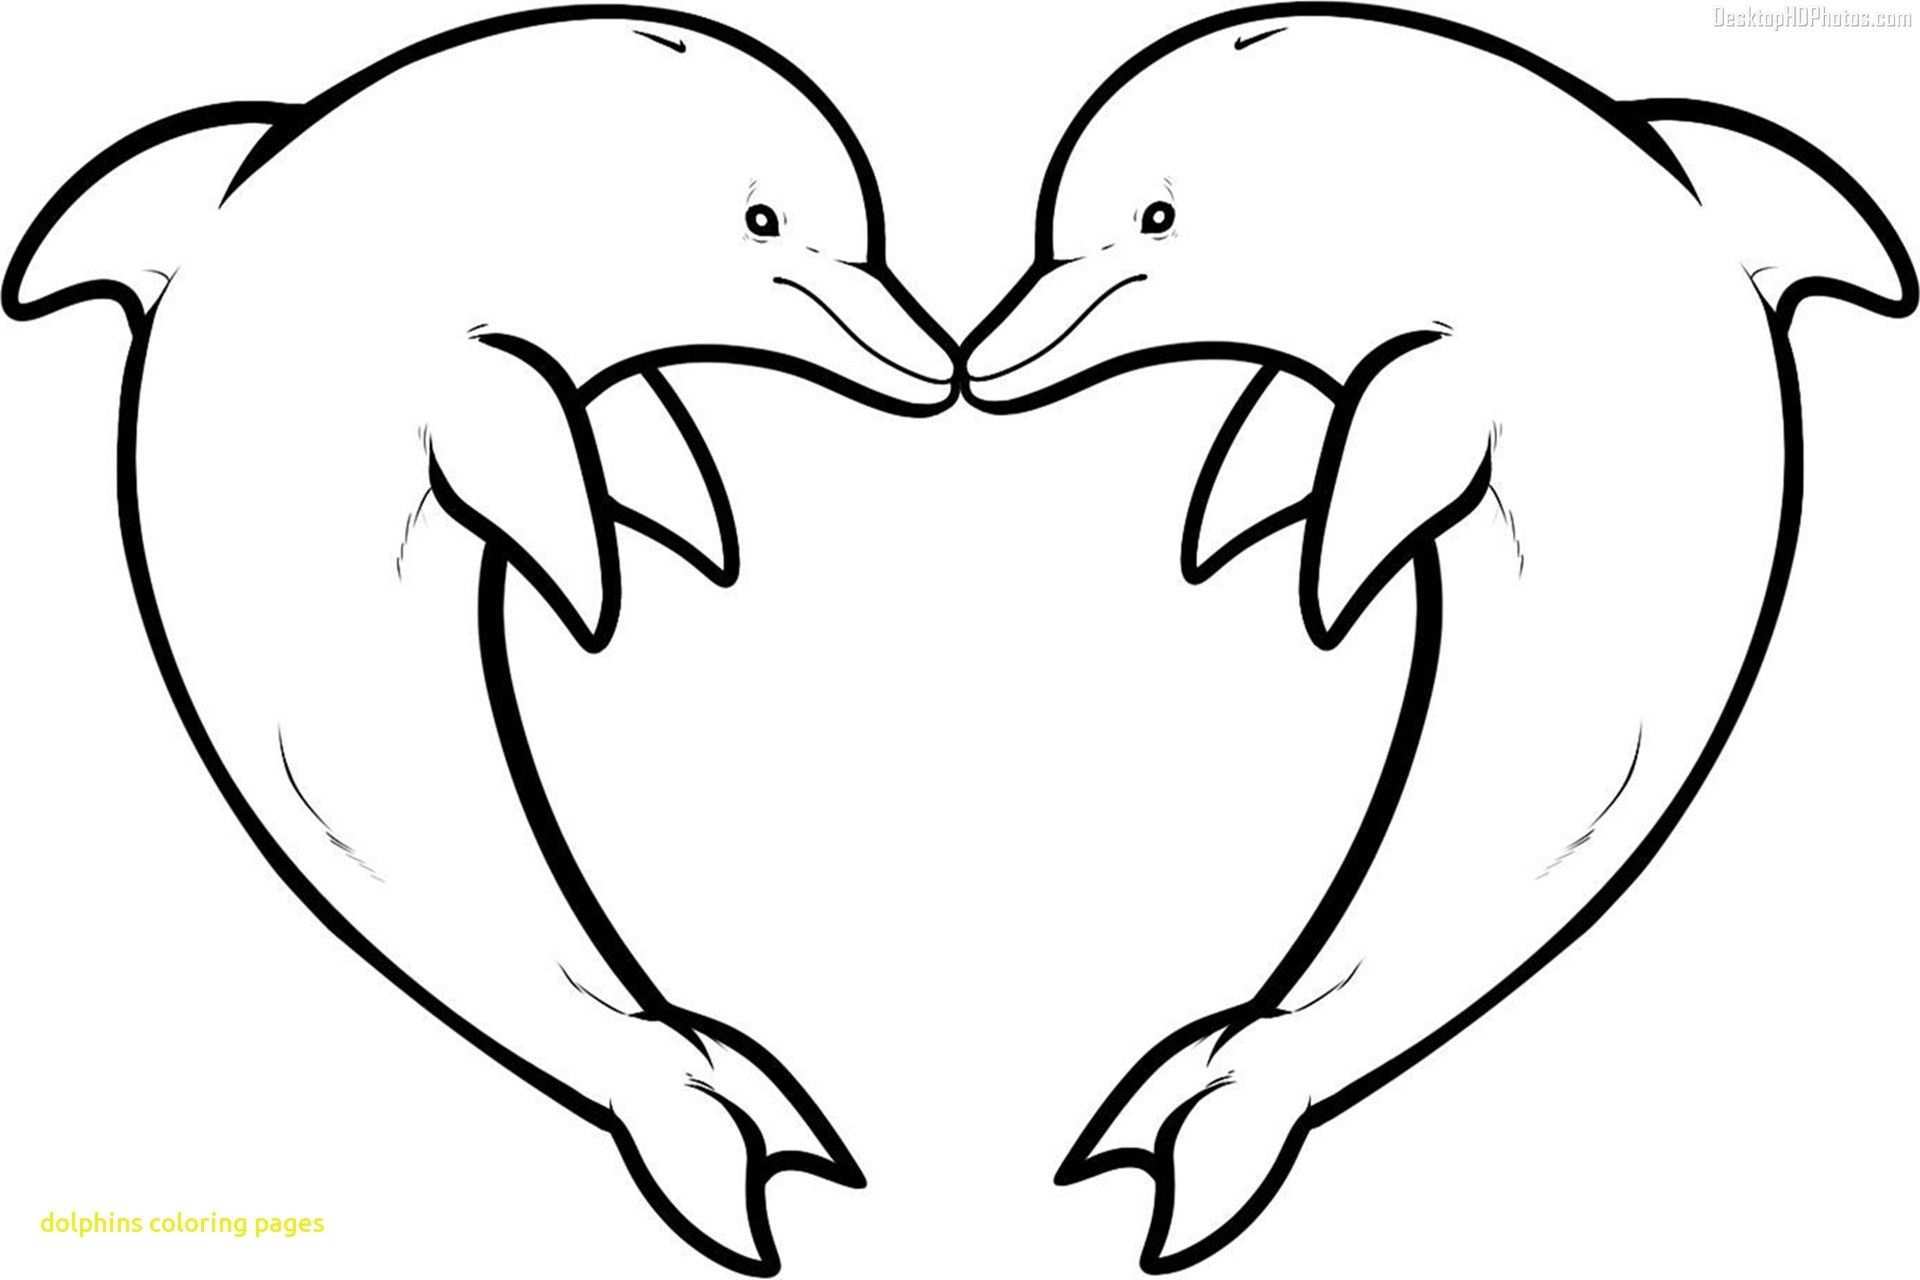 Charming Ideas Dolphin Coloring Page Realistic Baby Dolphin Coloring Pages Fiscalrefo